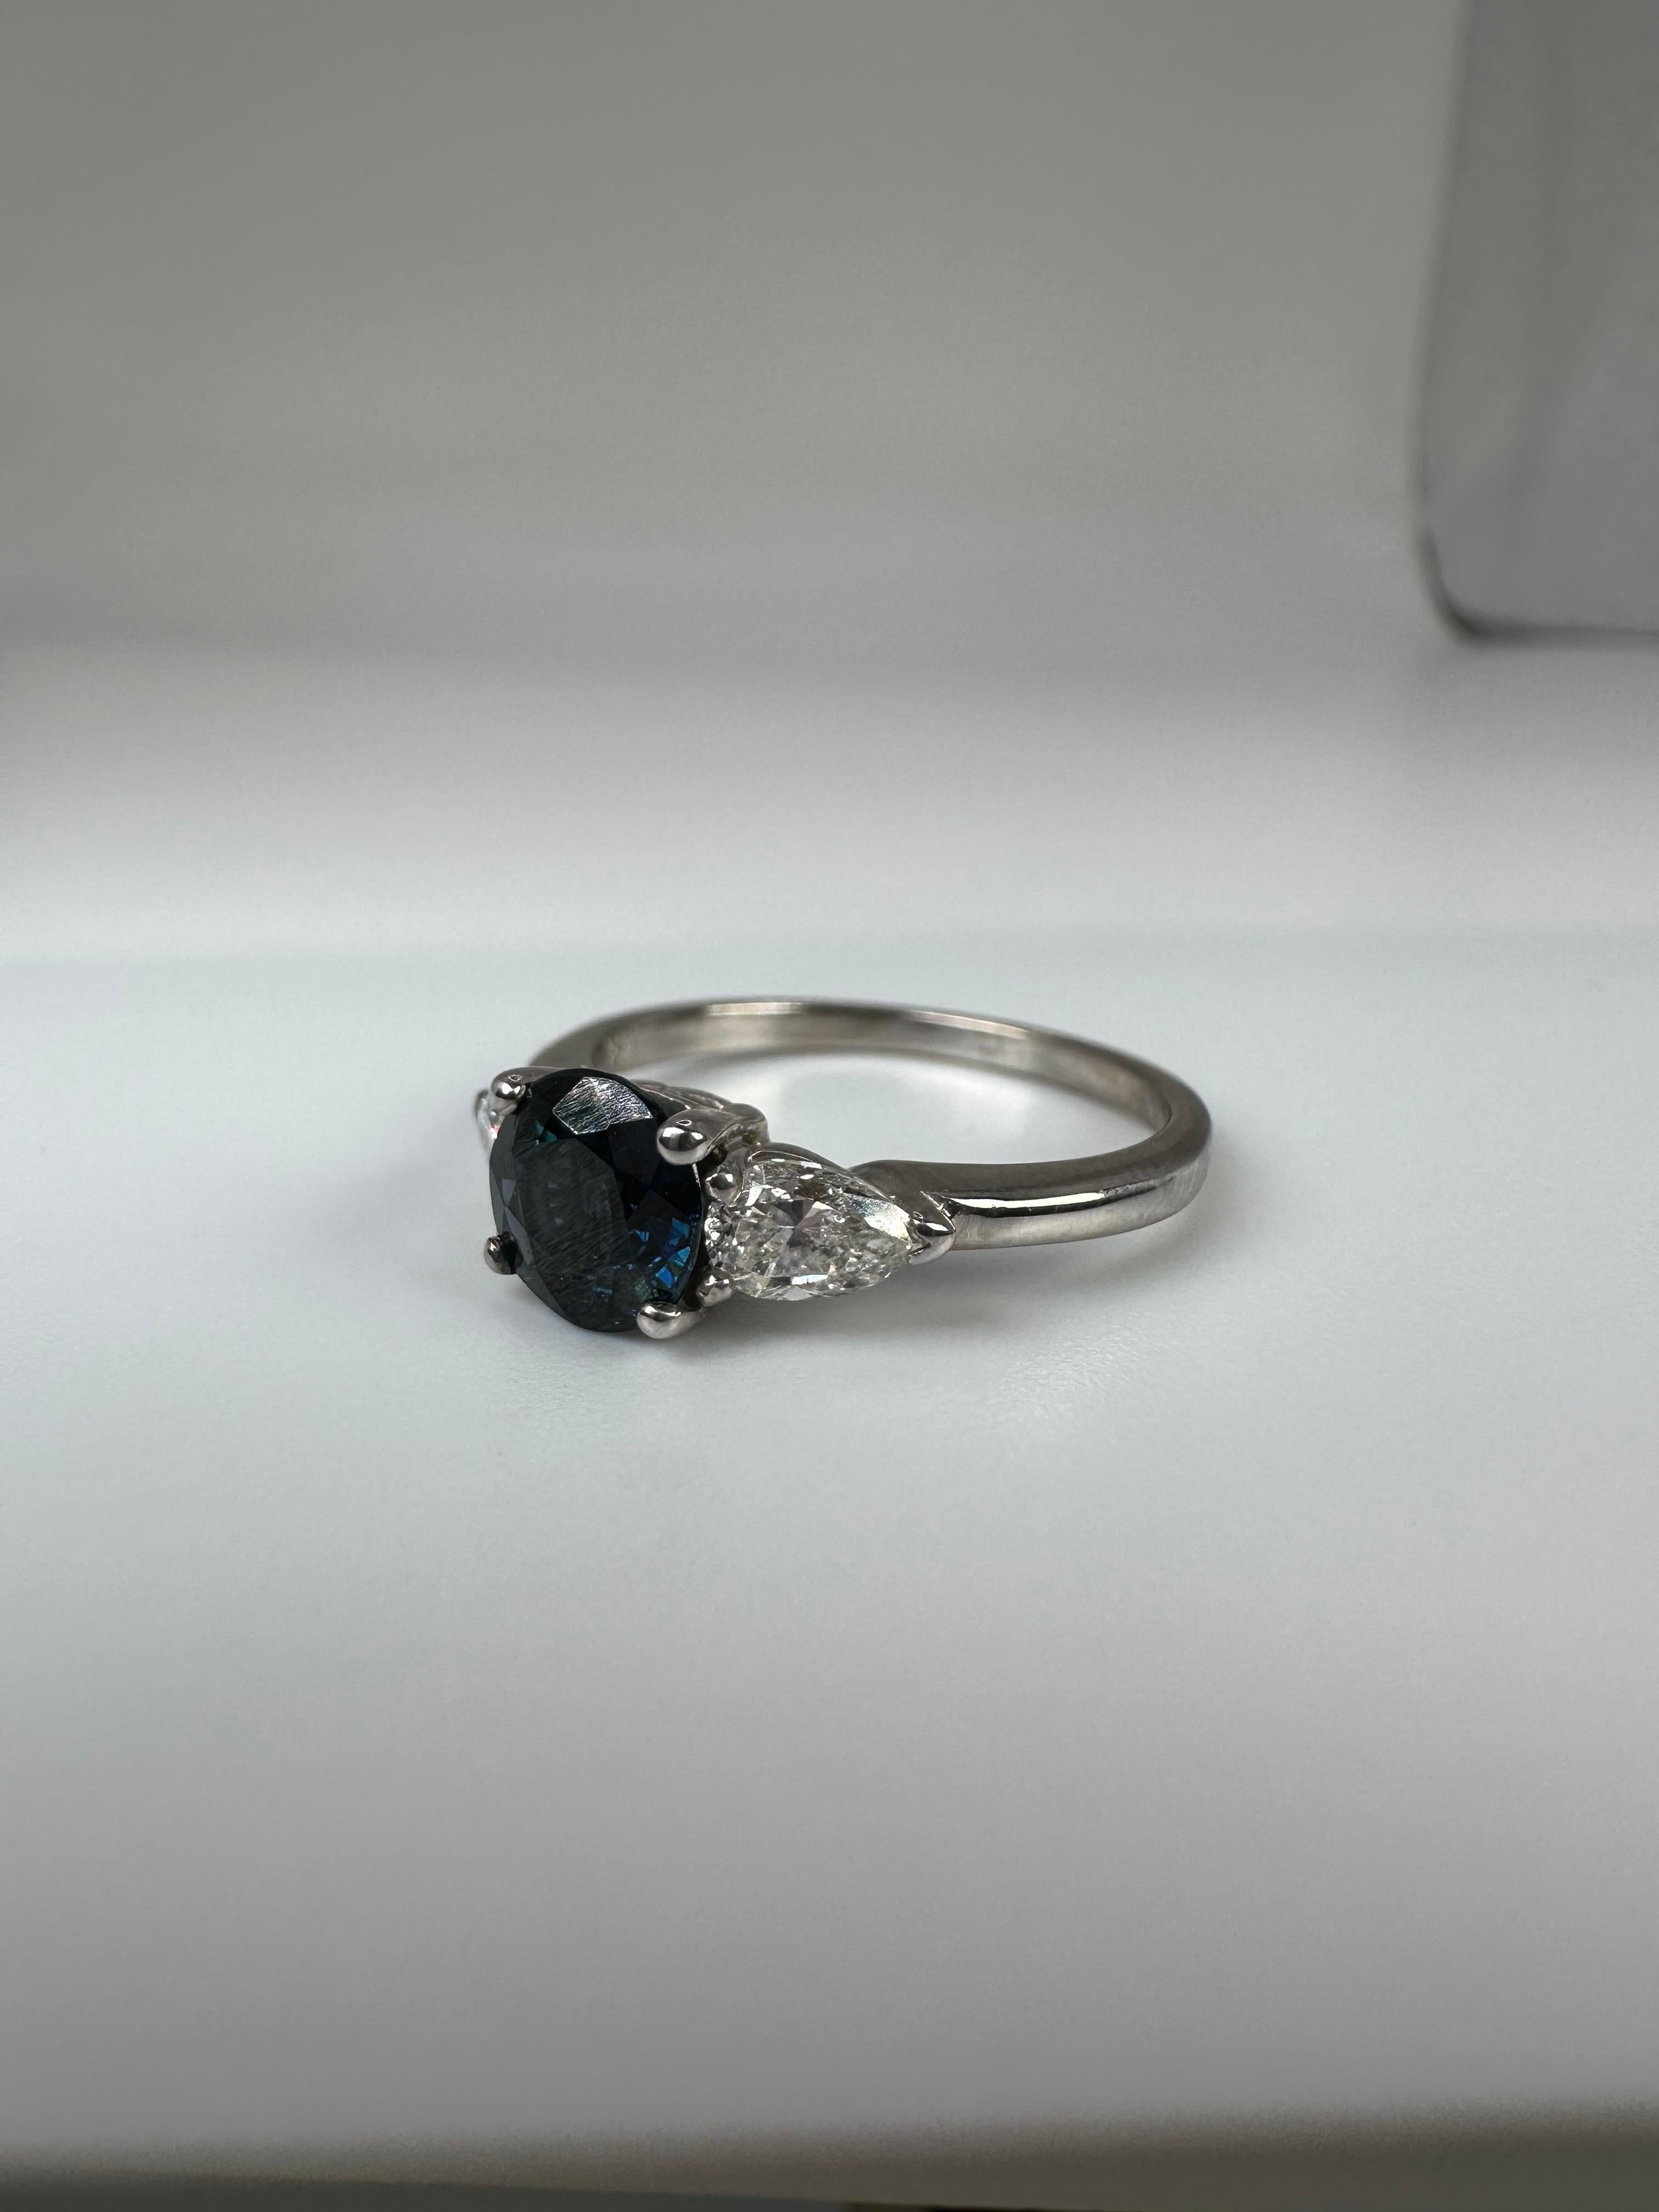 Three stone diamond ring made with sapphire and two stunning pear shape diamonds, the ring is a classical beauty. The diamonds are fantastic quality with lots of sparkle, the sapphire has a bit of a greenish undertone. This ring is modern with a